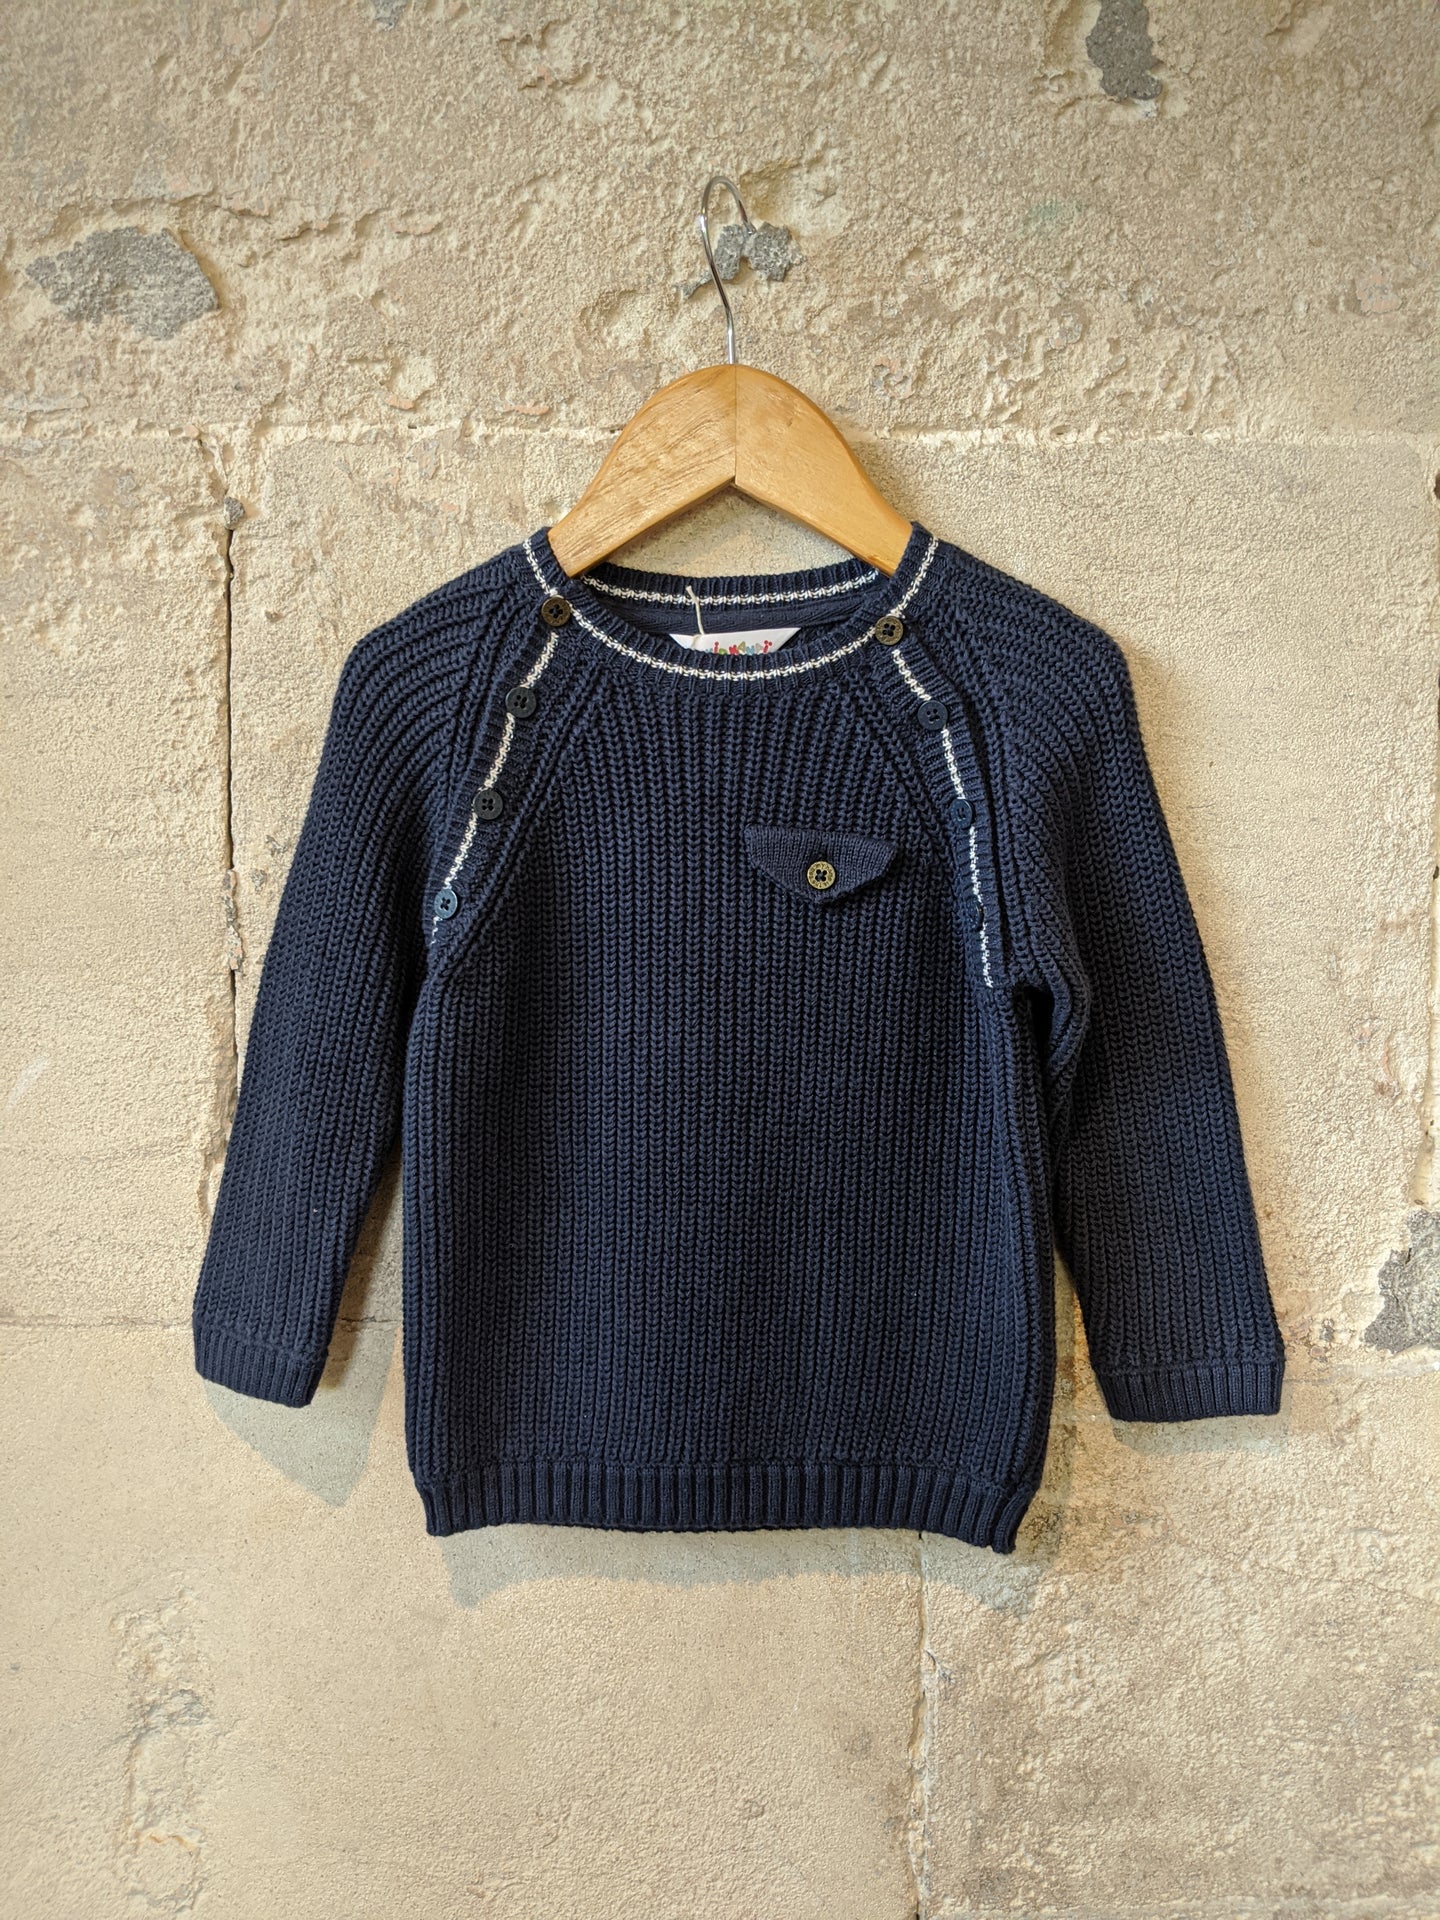 Classic French Navy Cotton Jumper - 18 Months